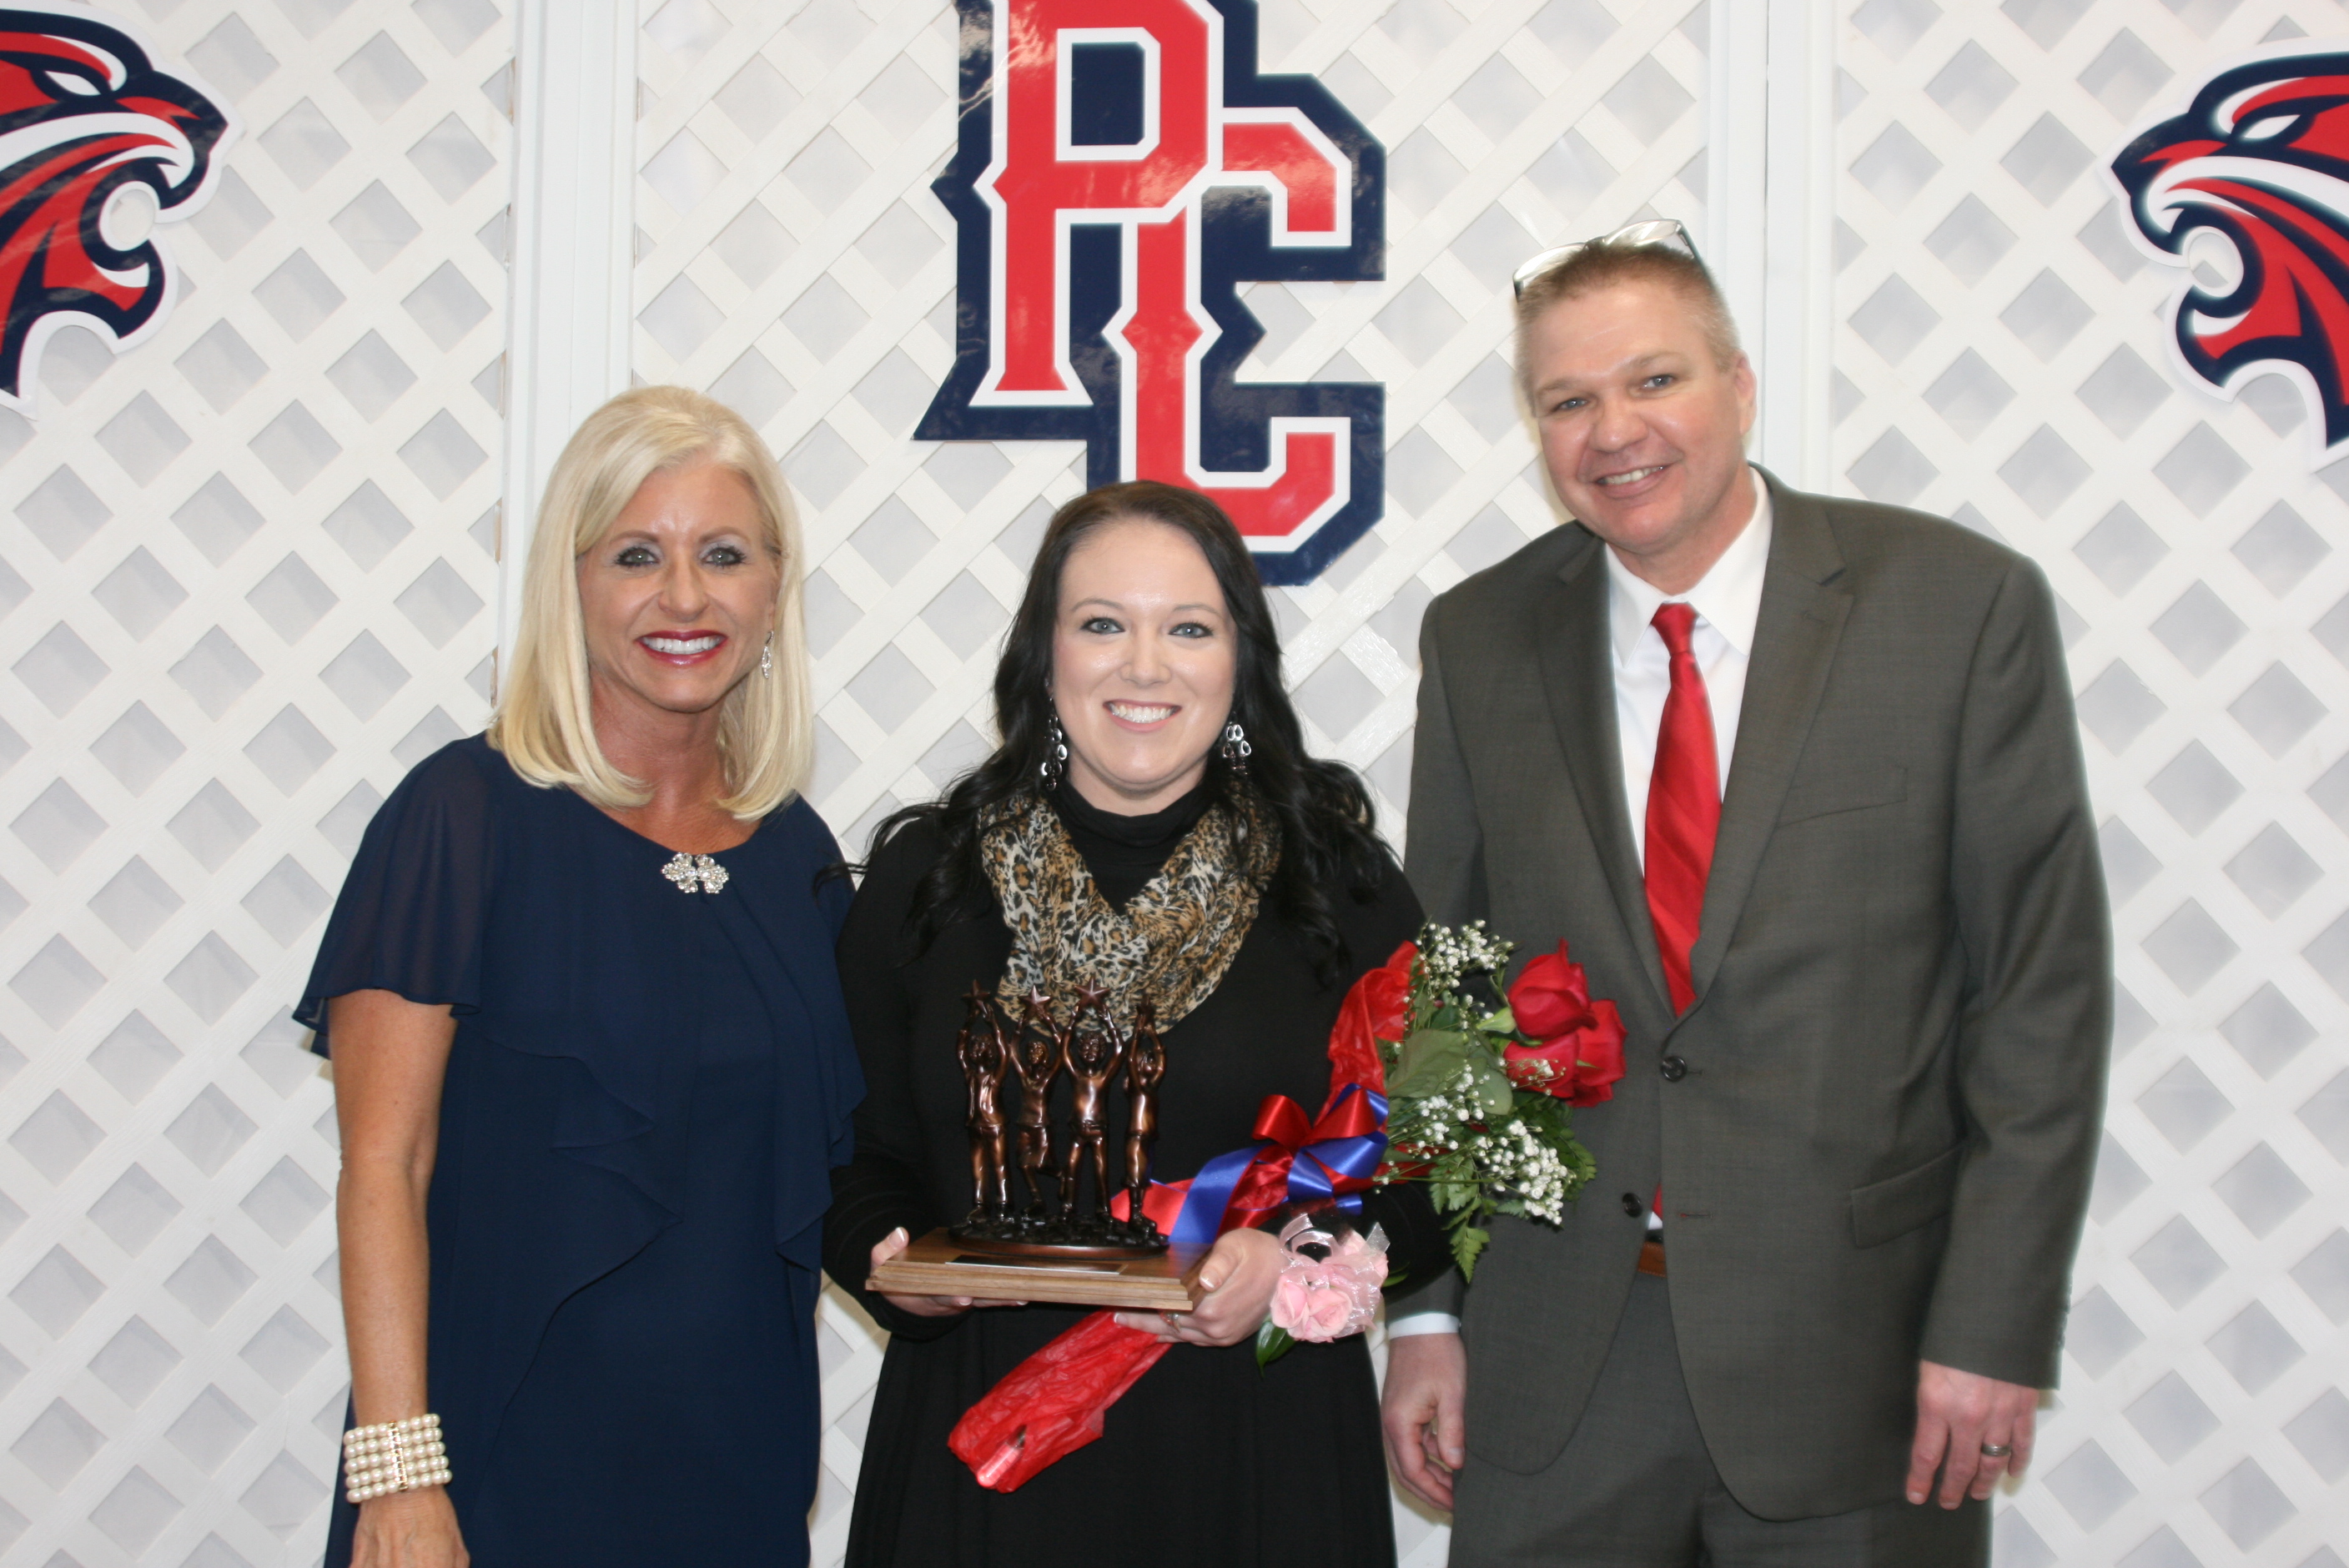 Lindsay Roehl is 2019 Ponca City Public School District Teacher of the Year